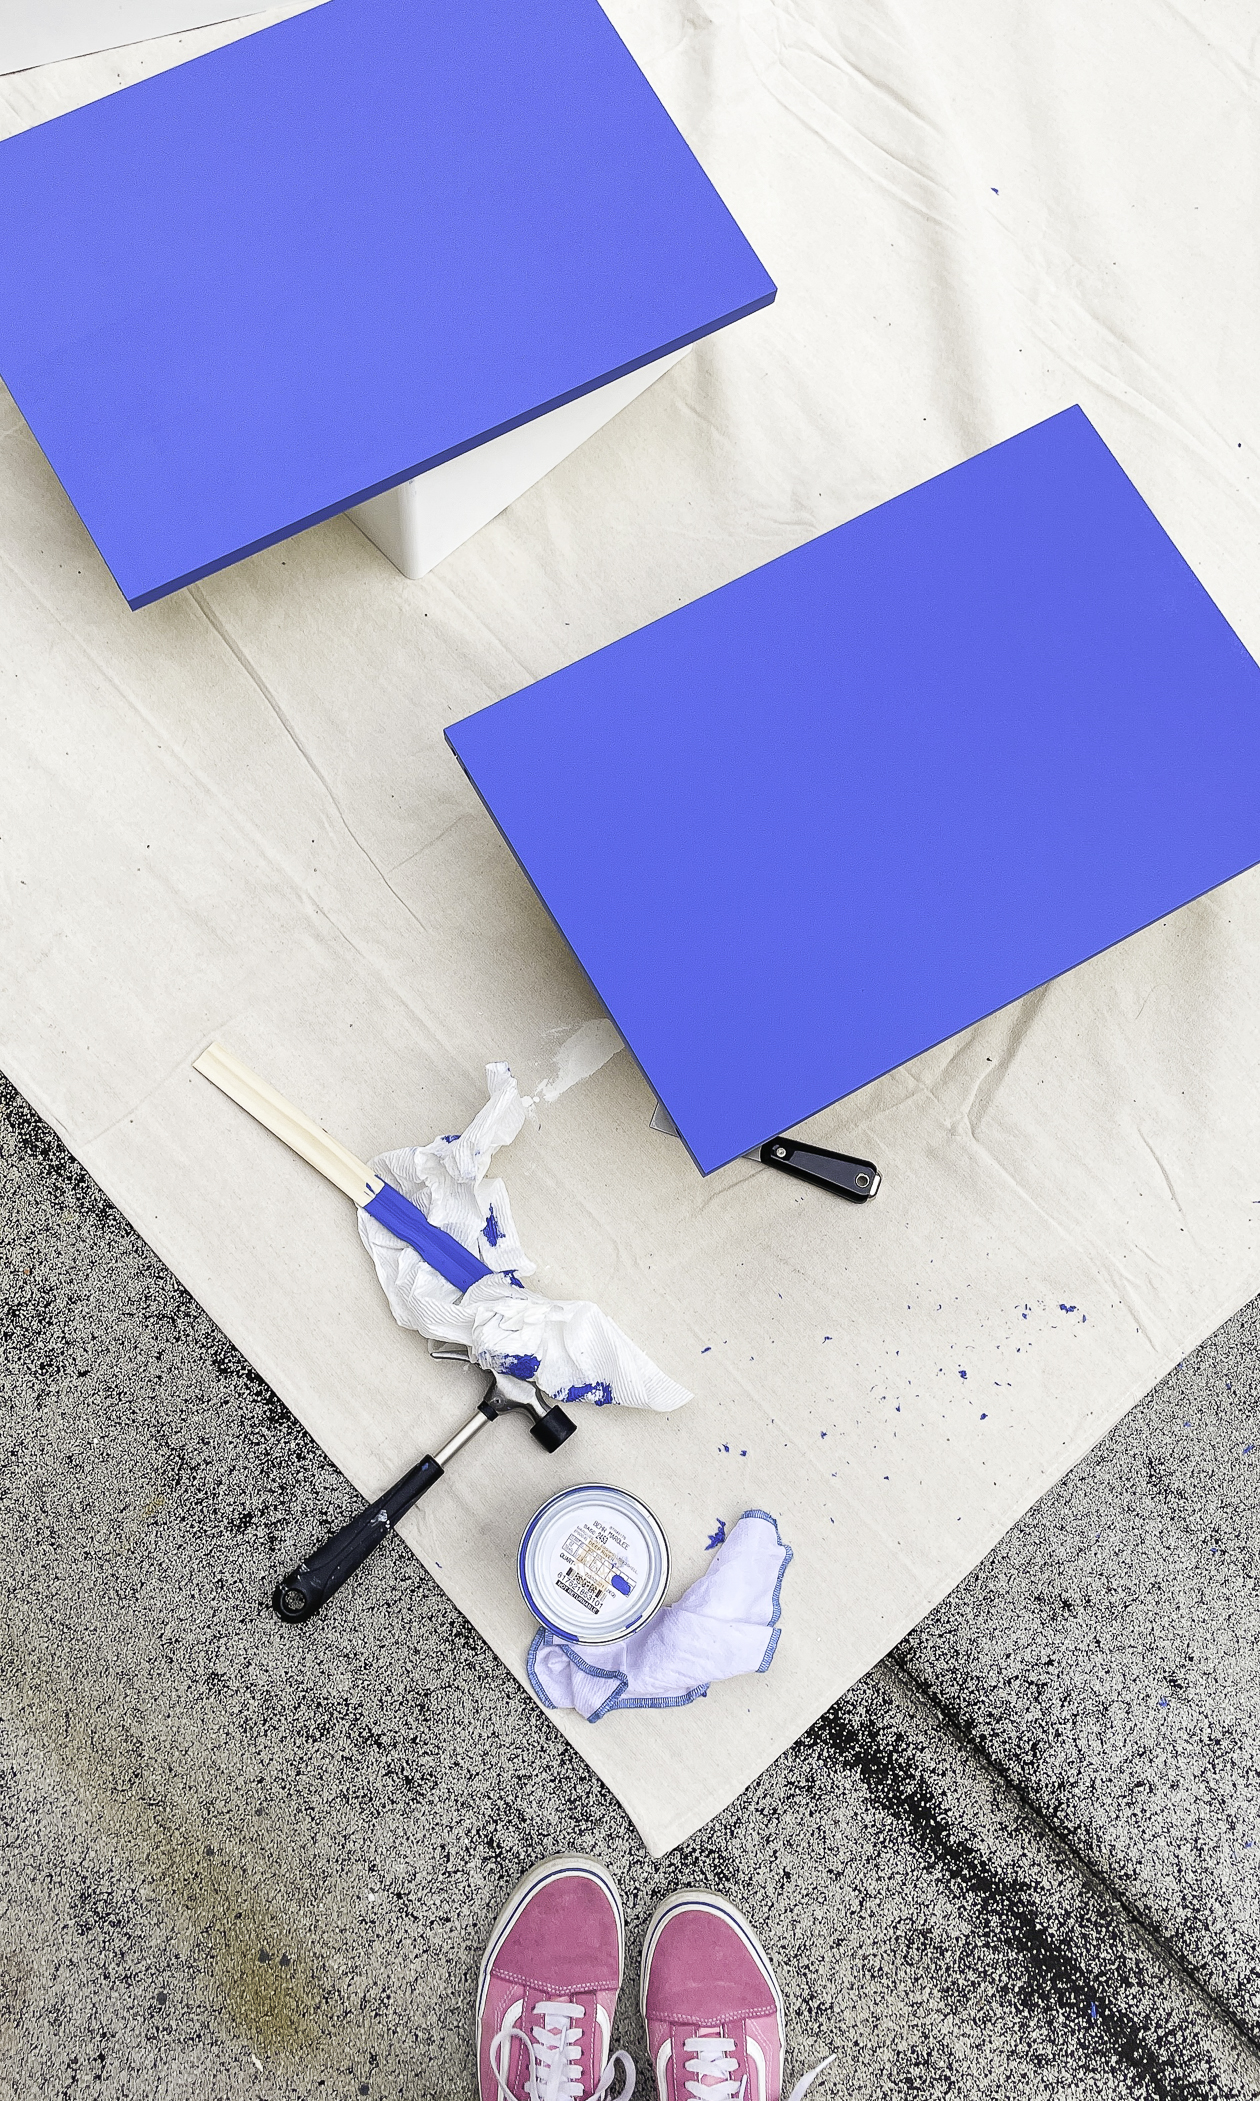 Ikea Desk Hack: Part II. How to paint Ikea furniture and how to make a desk using this basic Ikea furniture piece! 